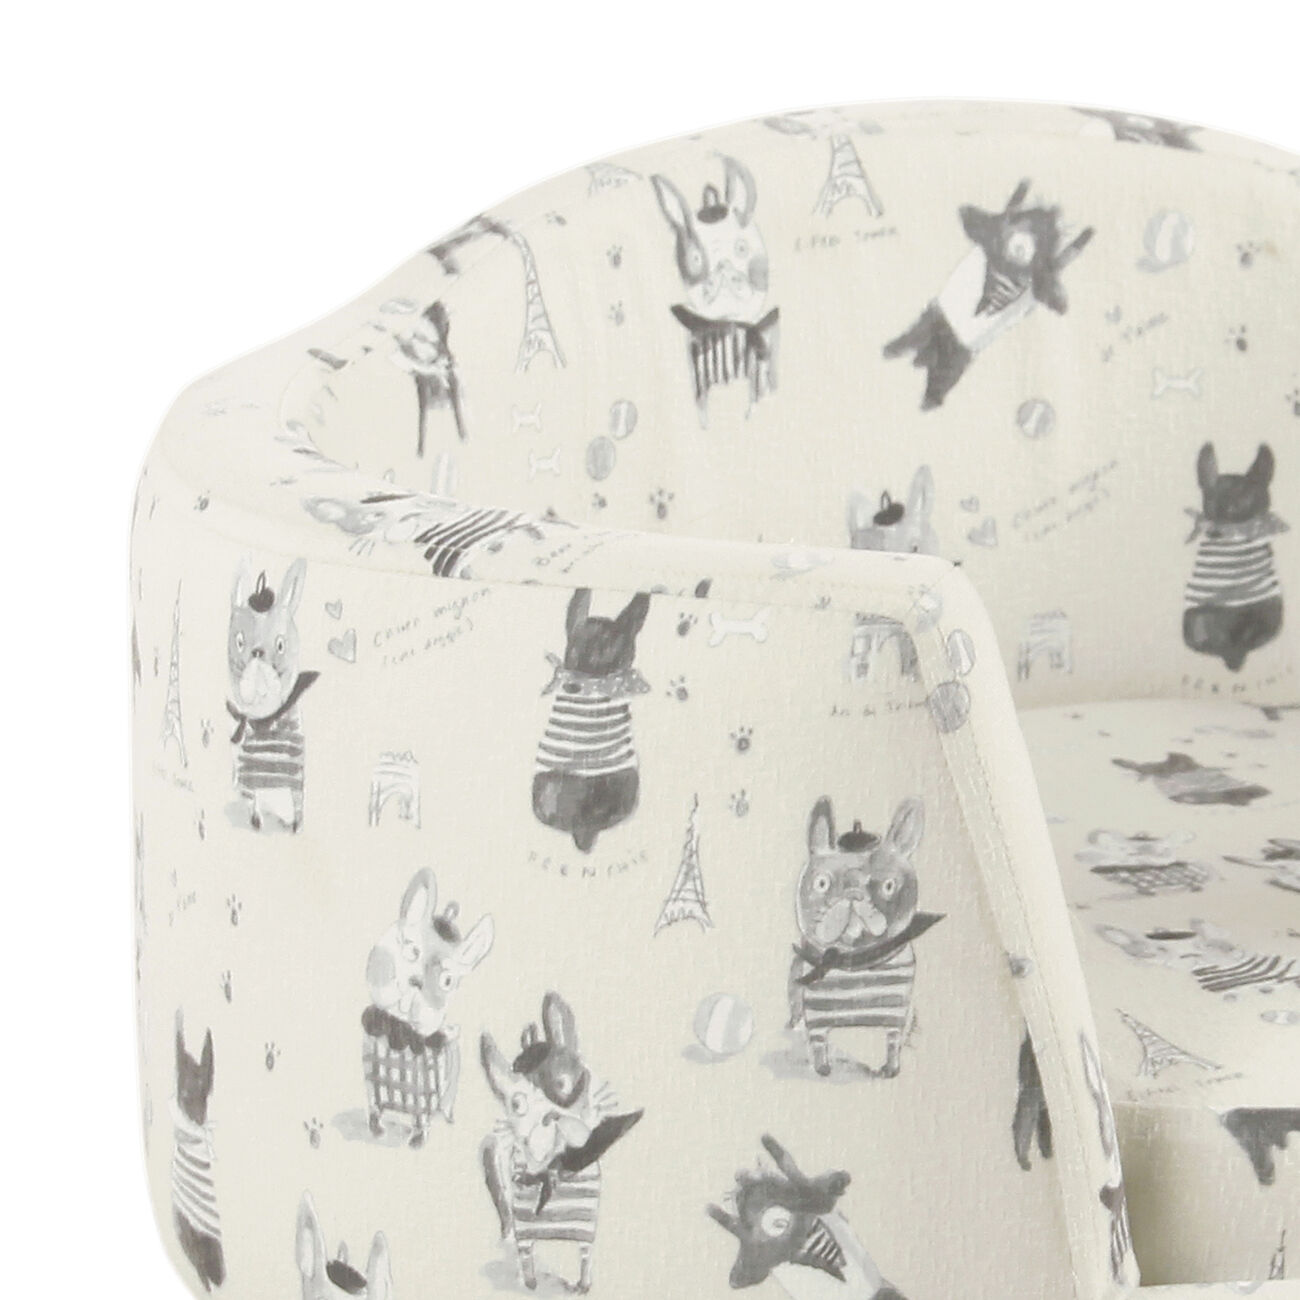 Wooden Pet Bed with French Bulldog Print Fabric Upholstery, Cream and Gray